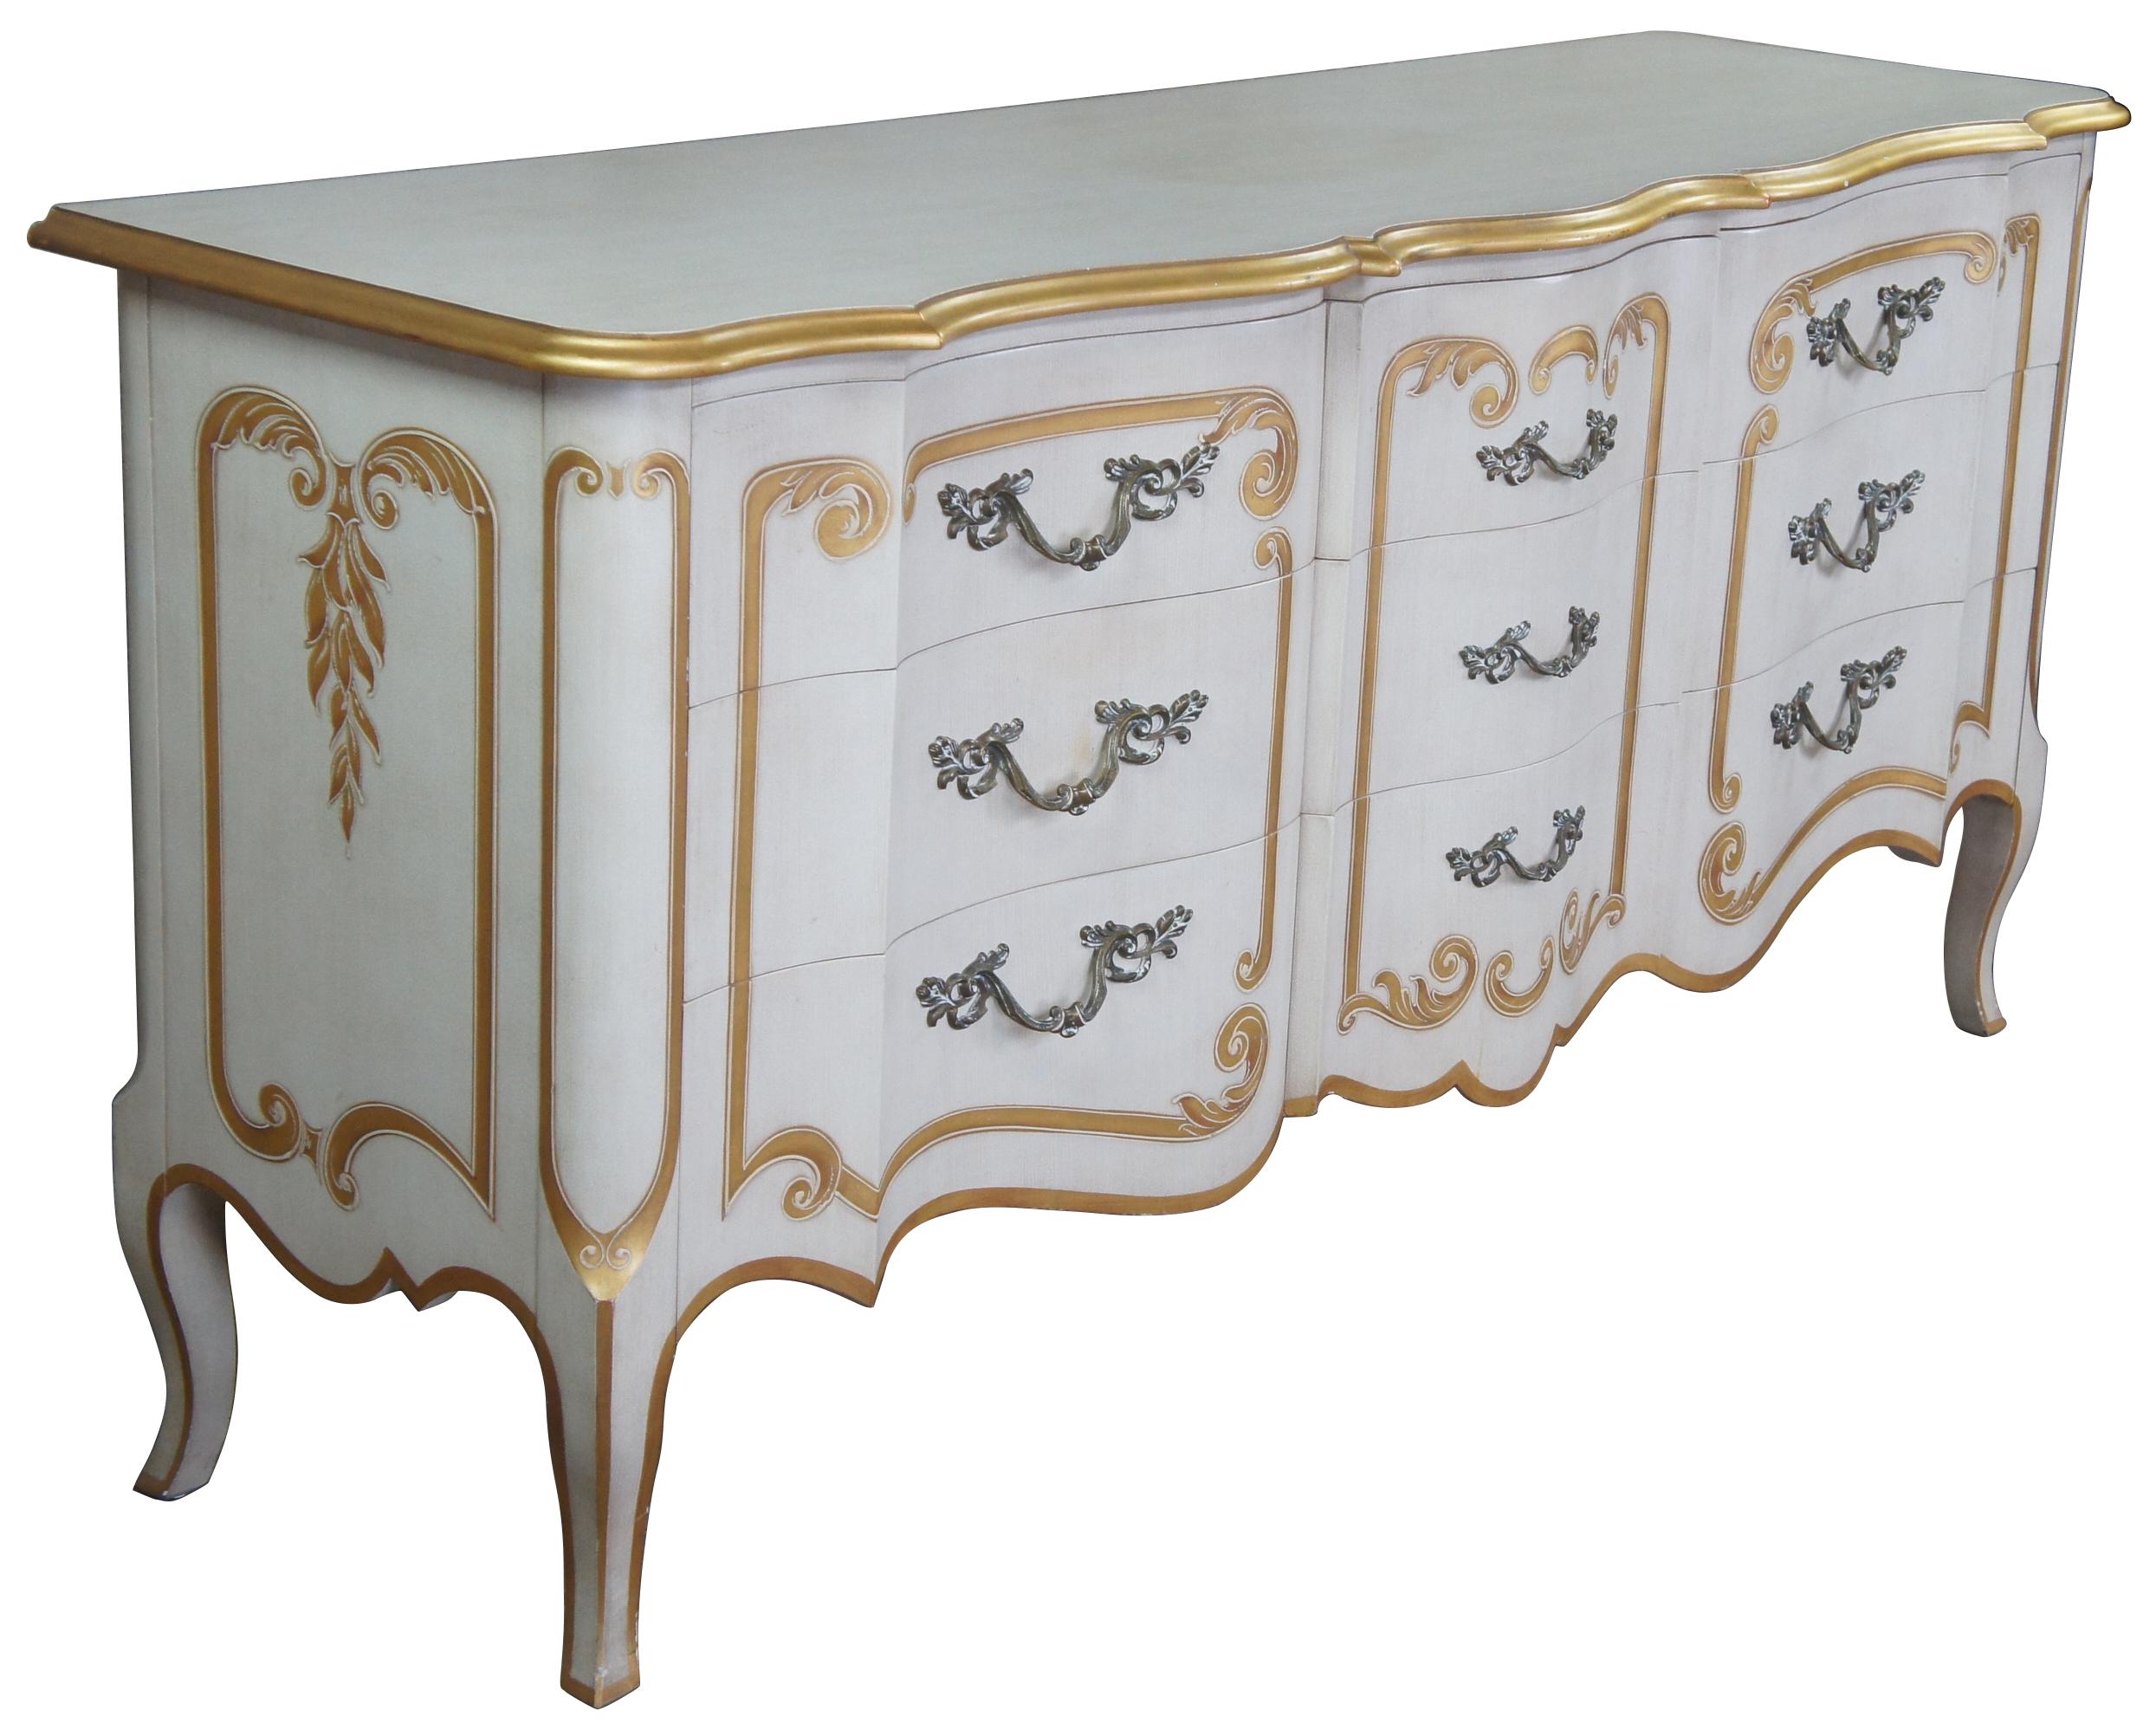 John Widdicomb dresser, circa 1960s. Drawing inspiration from Italian Florentine and Provincial. Features a rectangular form with serpentine front, 9 dovetail drawers with dividers and cabriole legs. Finished in antique white with gold painted